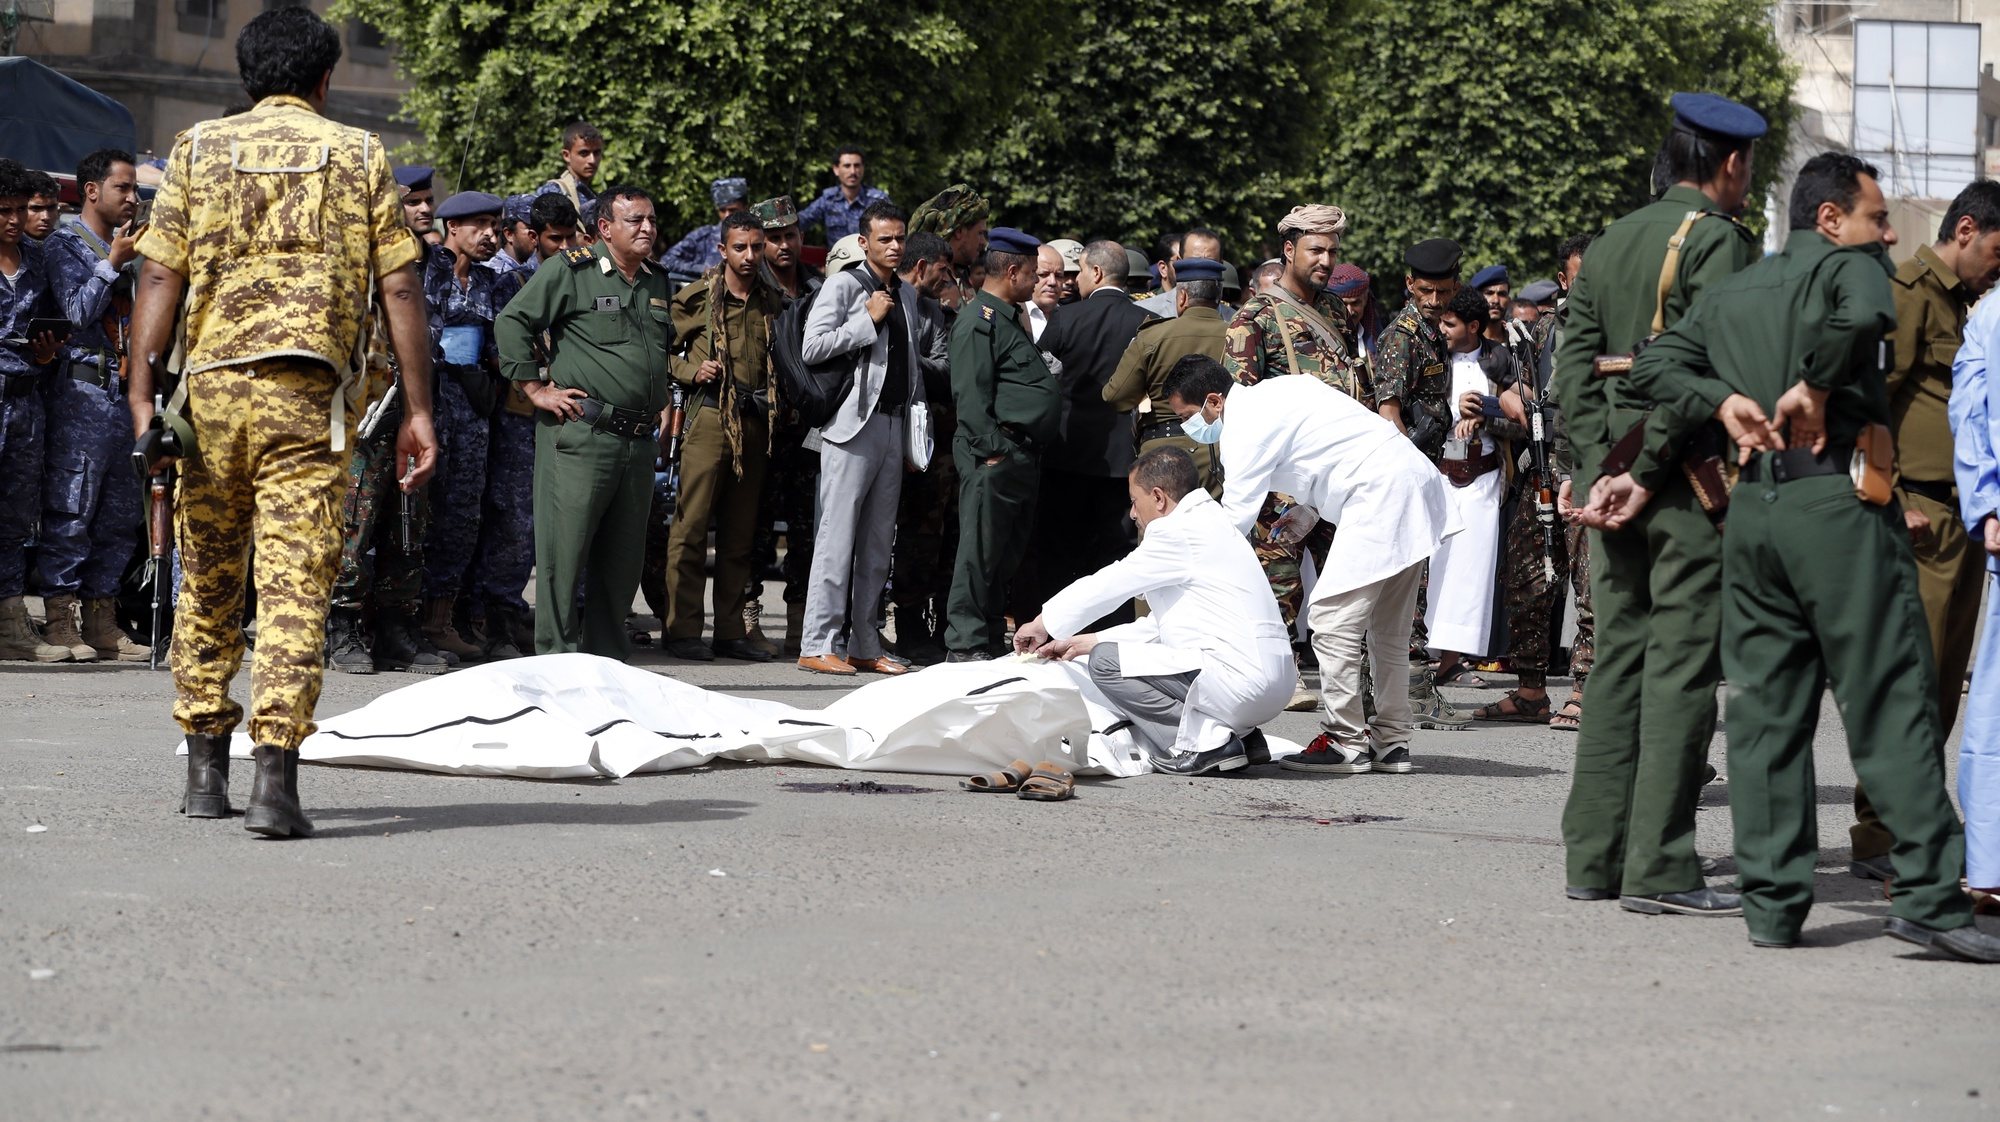 epa09275416 Soldiers wrap the bodies of Abdullah Al-Makhali and Mohammed Arman, convicted of raping and murdering a boy, after they were shot dead at a public square in Sana&#039;a, Yemen, 16 June 2021. Defendants Abdullah Al-Makhali, 38, and Mohammed Arman, 33, convicted of raping and killing boy Mohammed al-Haddad, were executed at a public square in the Yemeni capital Sana&#039;a.  EPA/YAHYA ARHAB